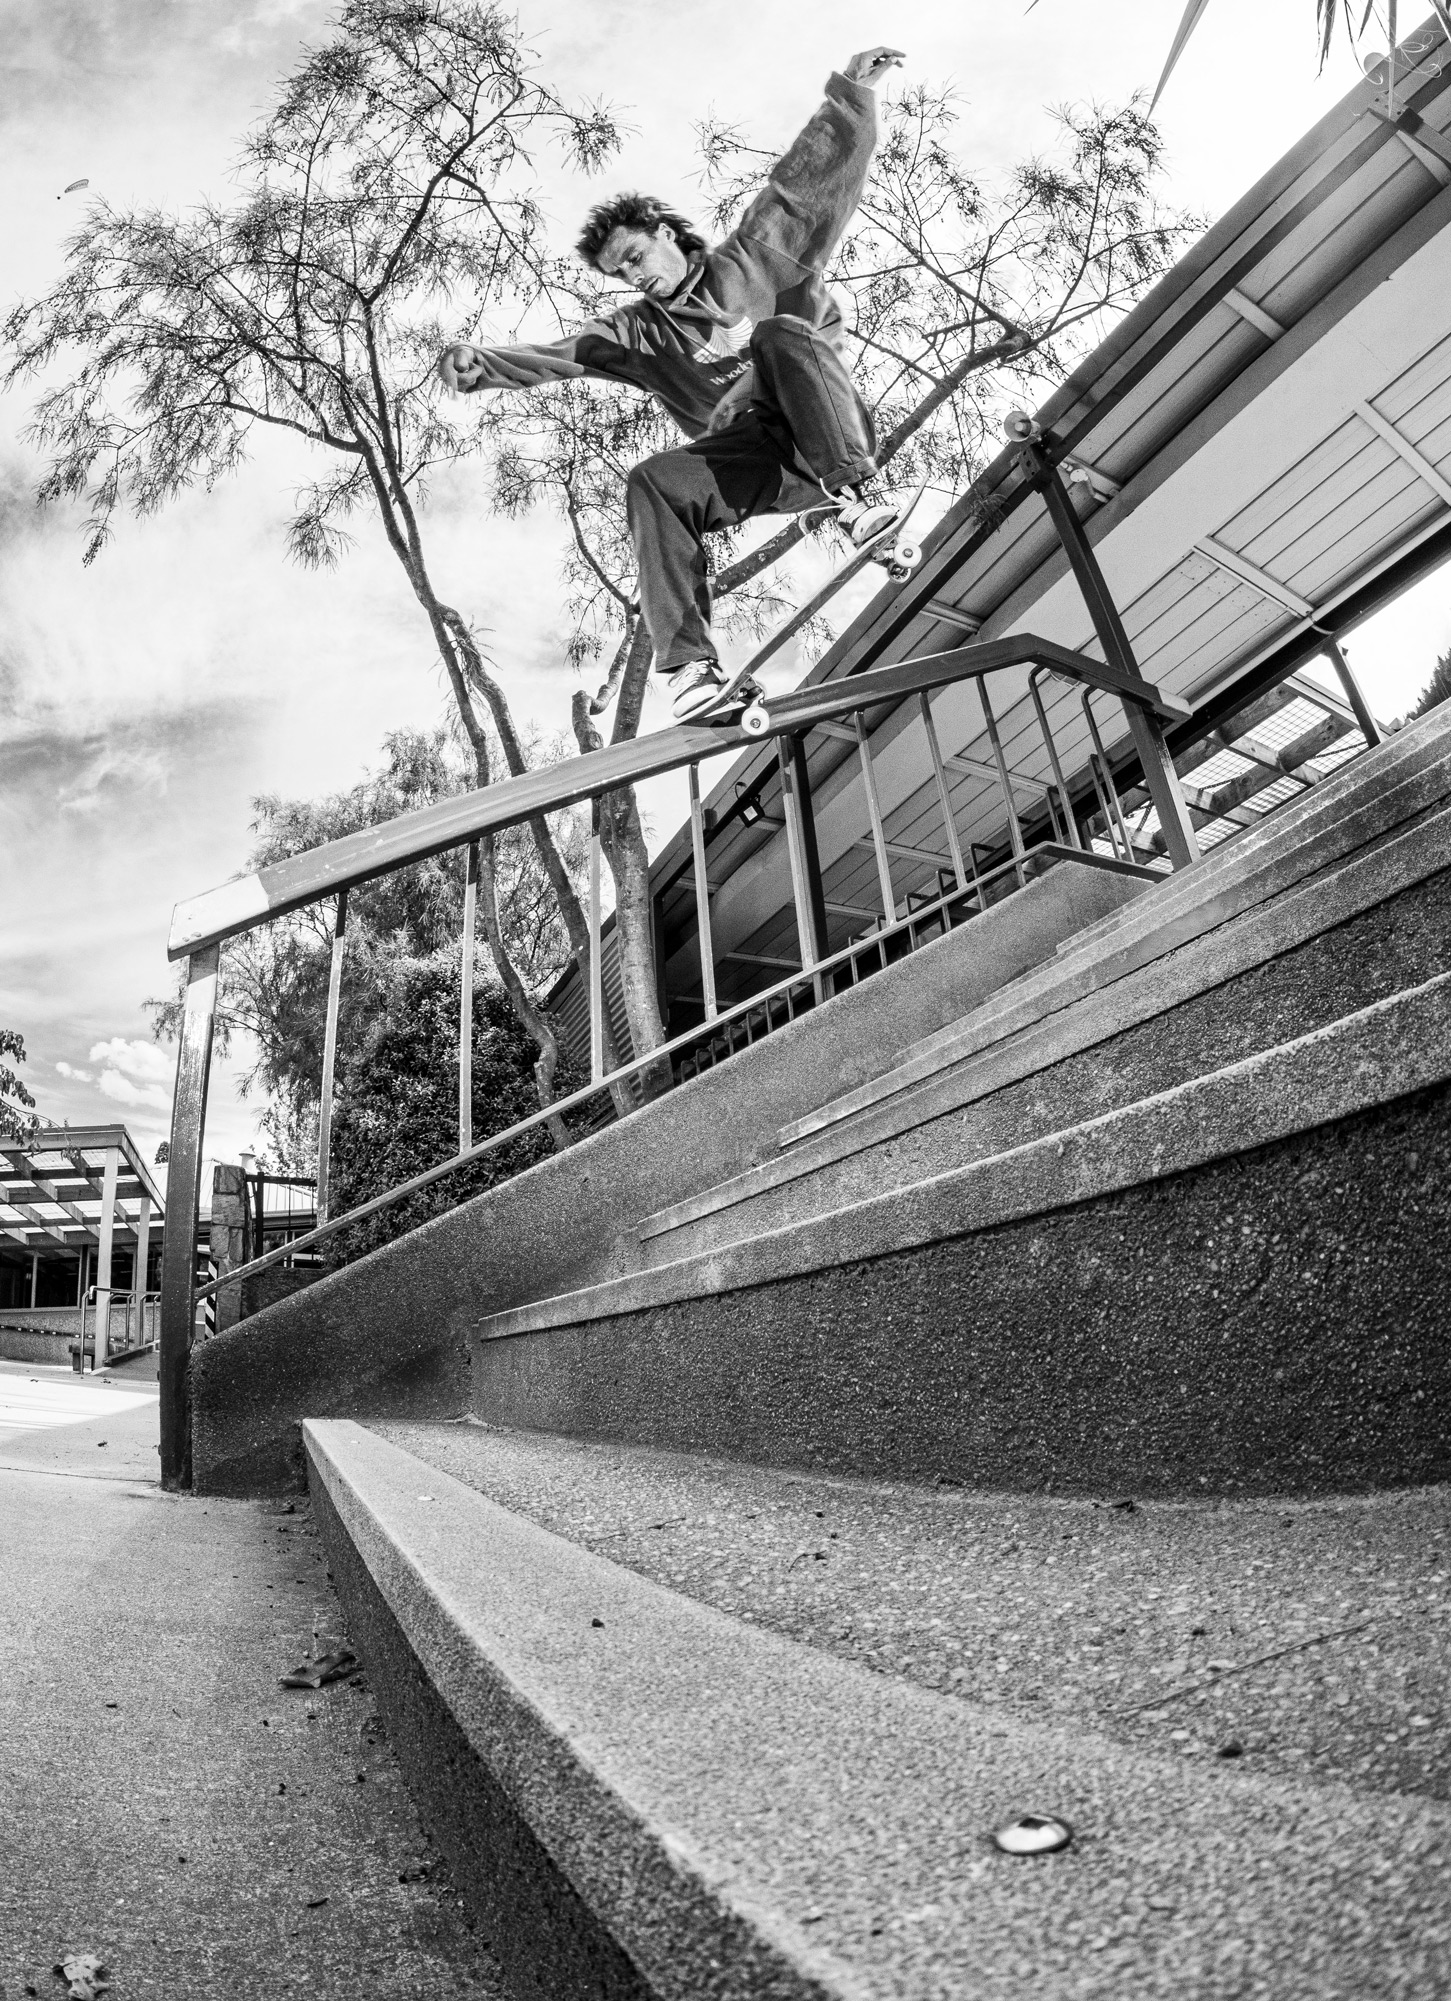 Jack Byrne, crooked grind, Queenstown. Photo by Beach Thurlow.